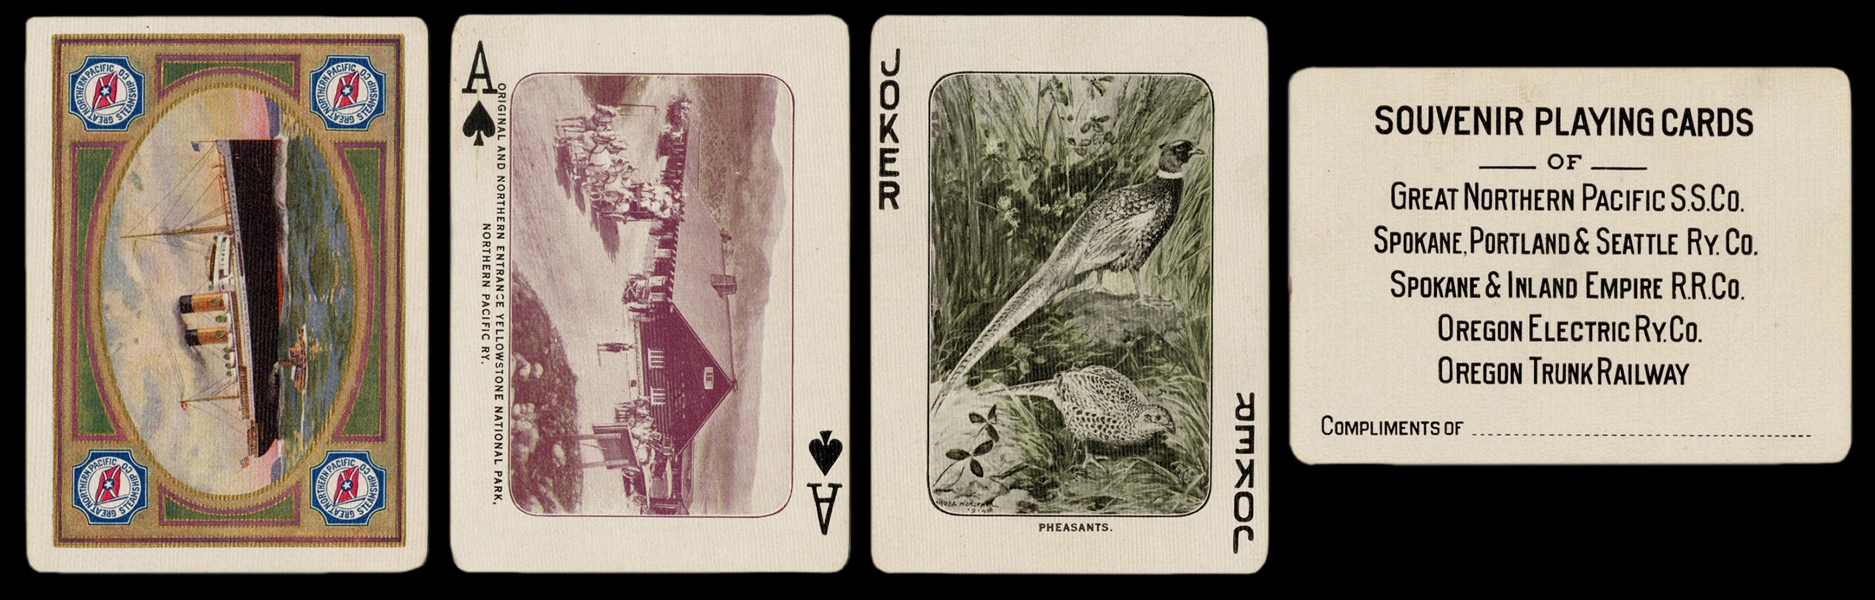  Great Northern Pacific Steamship Co. Souvenir Playing Cards...